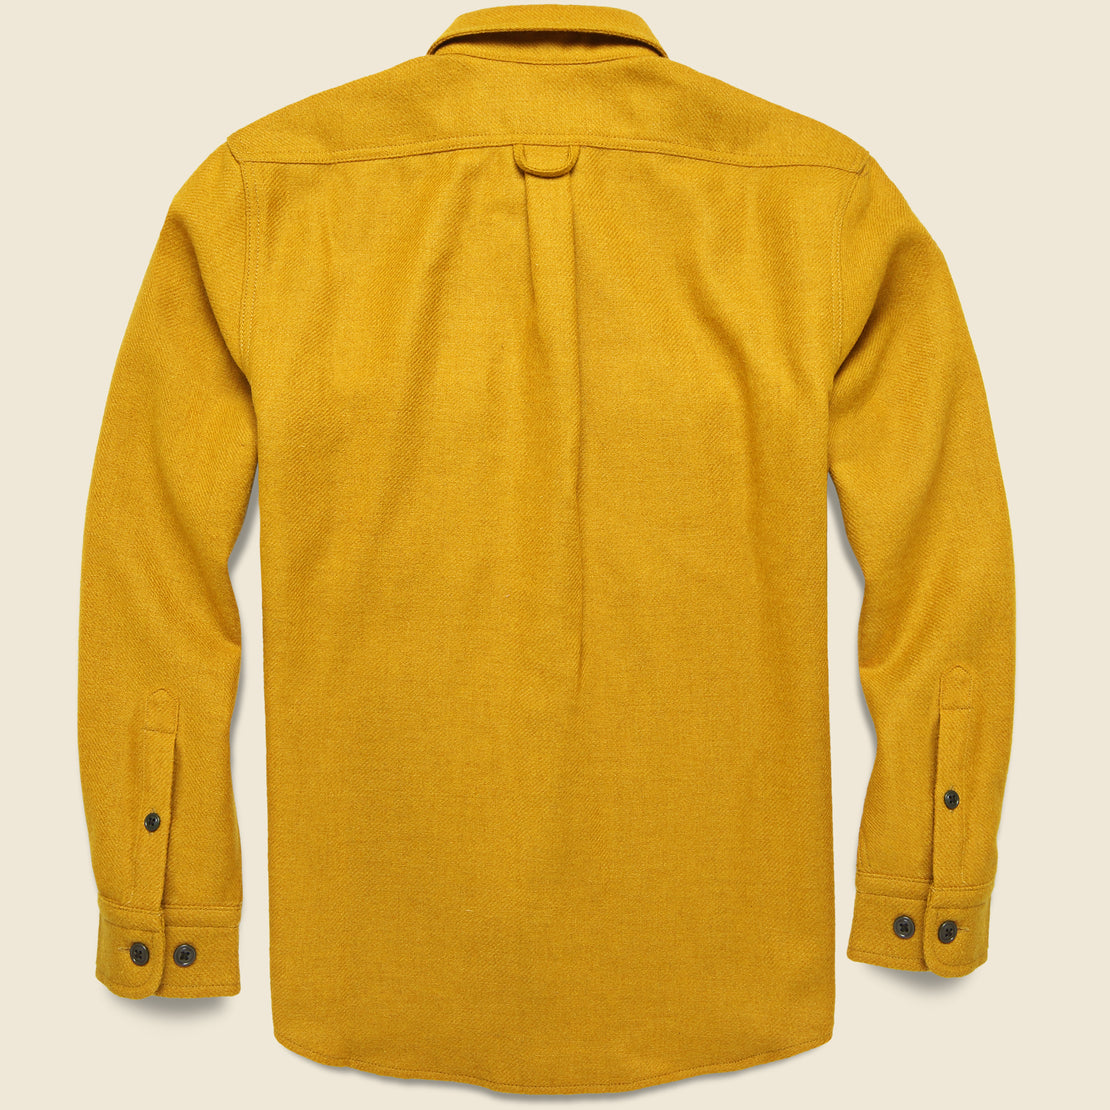 Northwest Wool Shirt - Mustard - Filson - STAG Provisions - Tops - L/S Woven - Overshirt